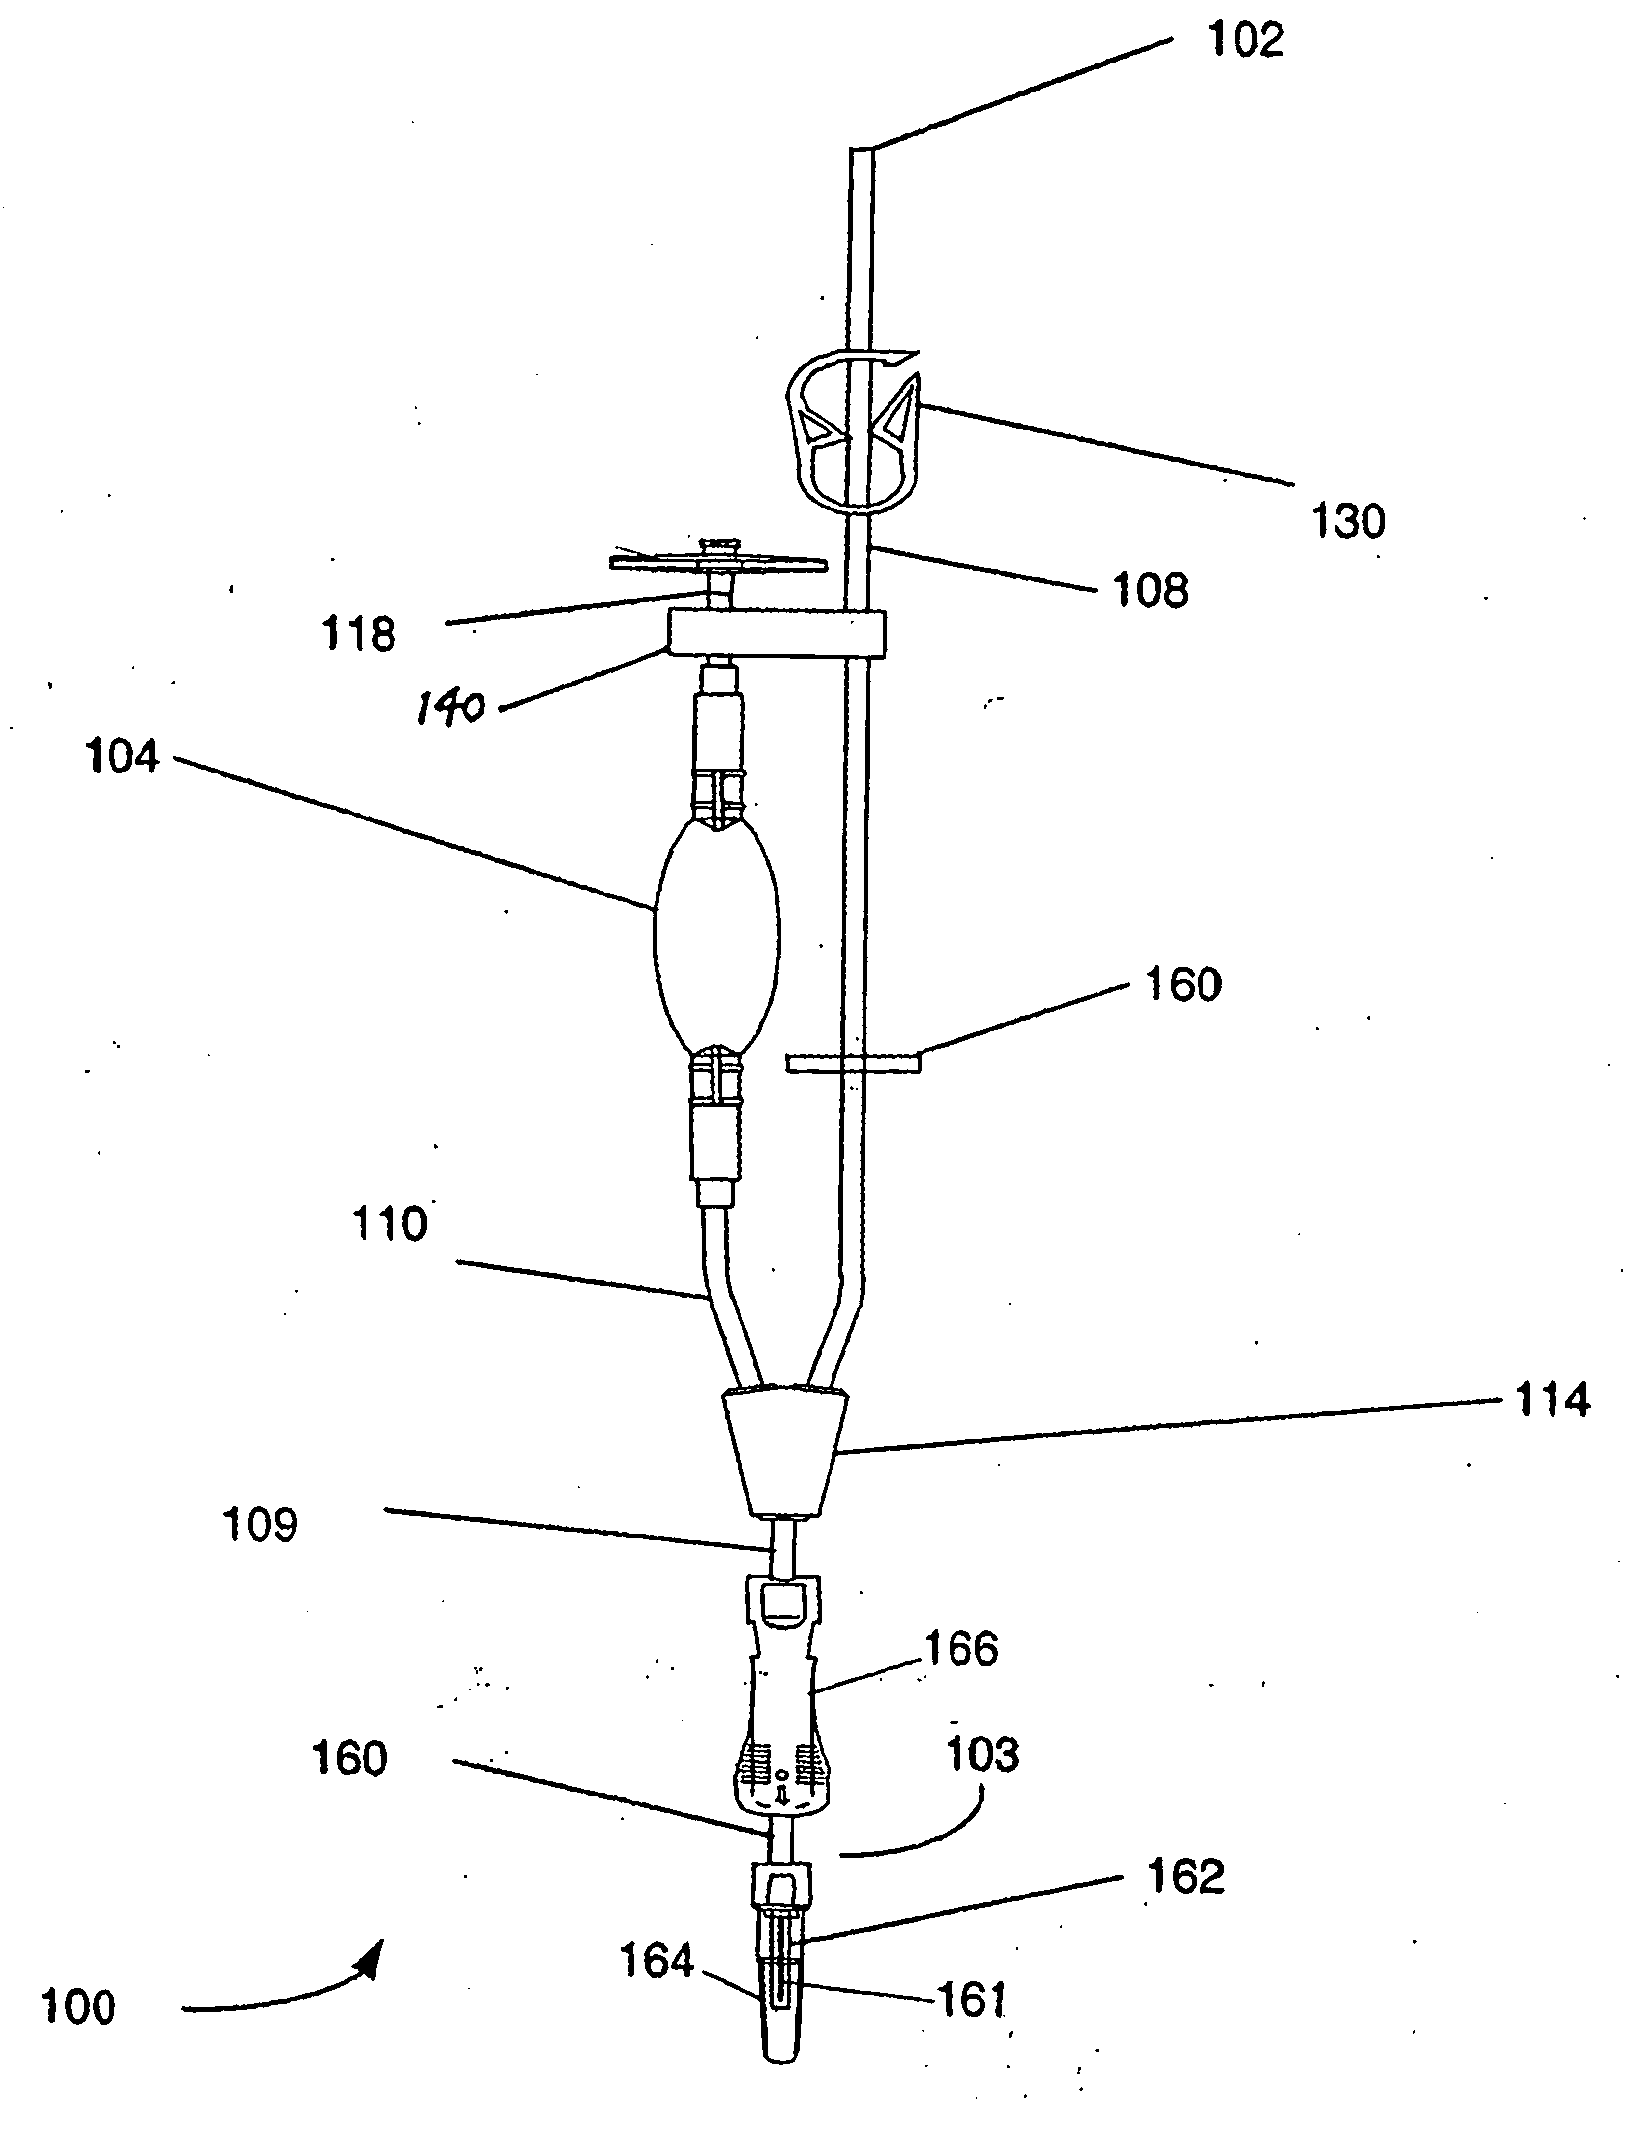 Closed method and system for the sampling and testing of fluid